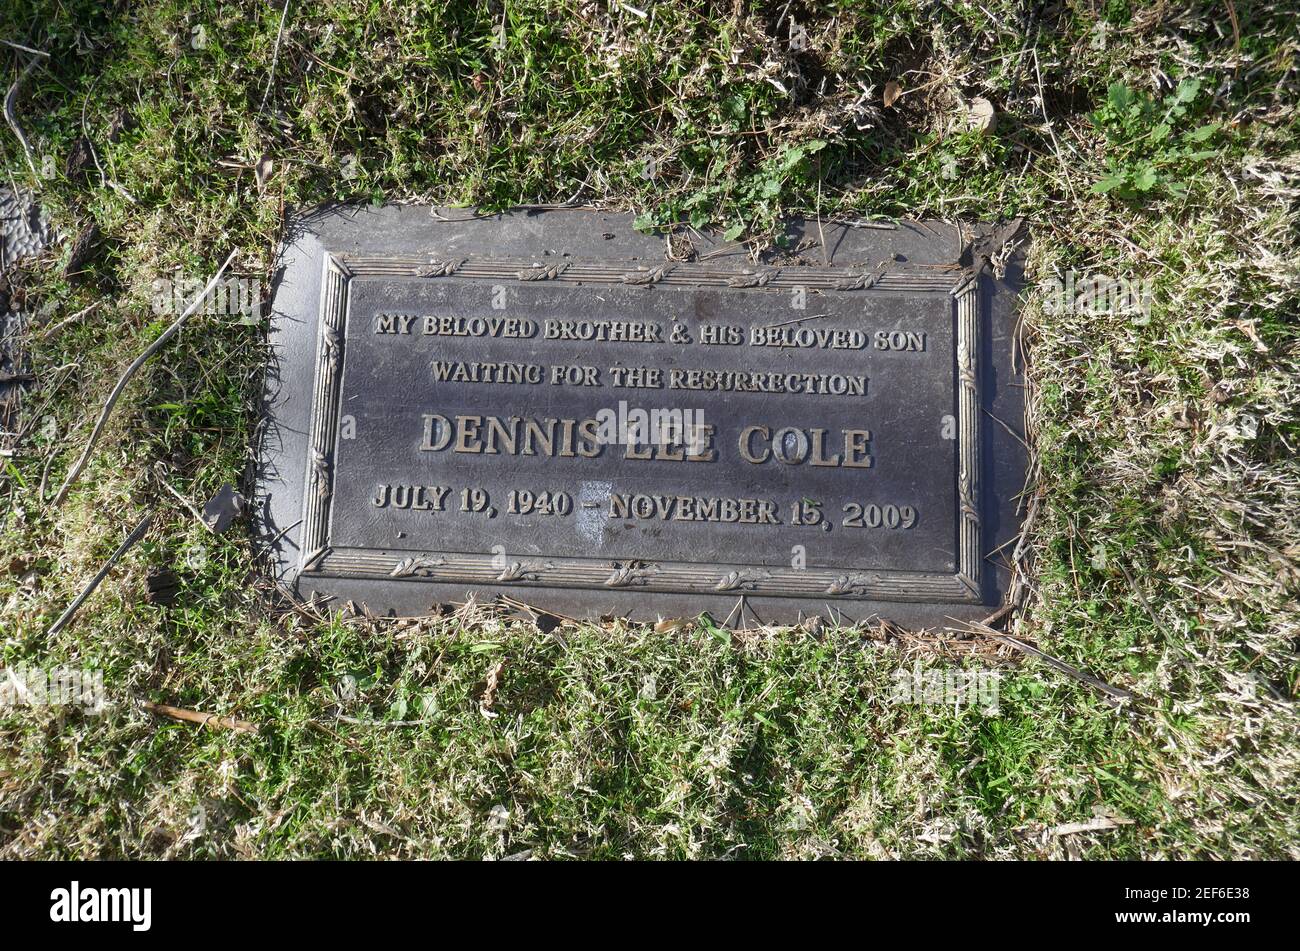 Los Angeles, California, USA 16th February 2021 A general view of atmosphere of actor Dennis Cole's Grave at Forest Lawn Memorial Park Hollywood Hills on February 16, 2021 in Los Angeles, California, USA. Photo by Barry King/Alamy Stock Photo Stock Photo